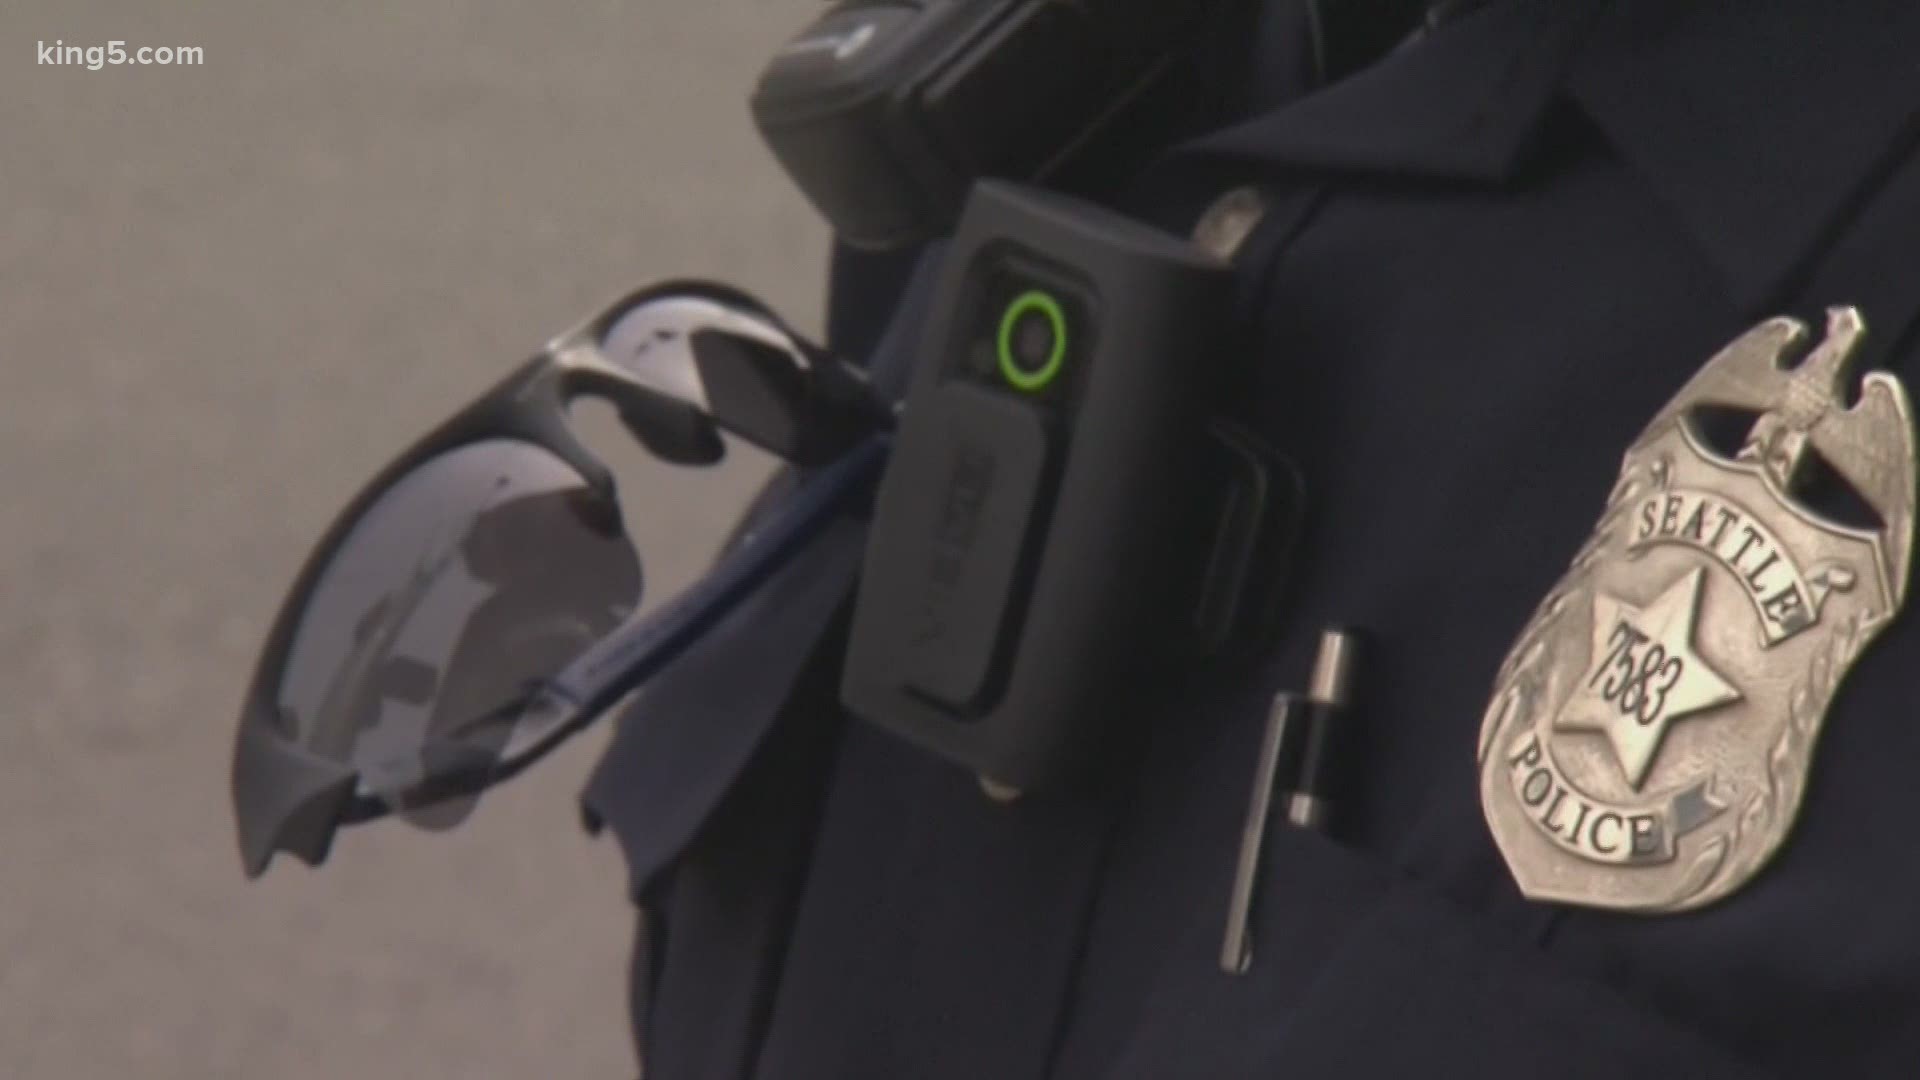 A grant from the Department of Justice would help fund the majority of start-up costs for 150 body cams.